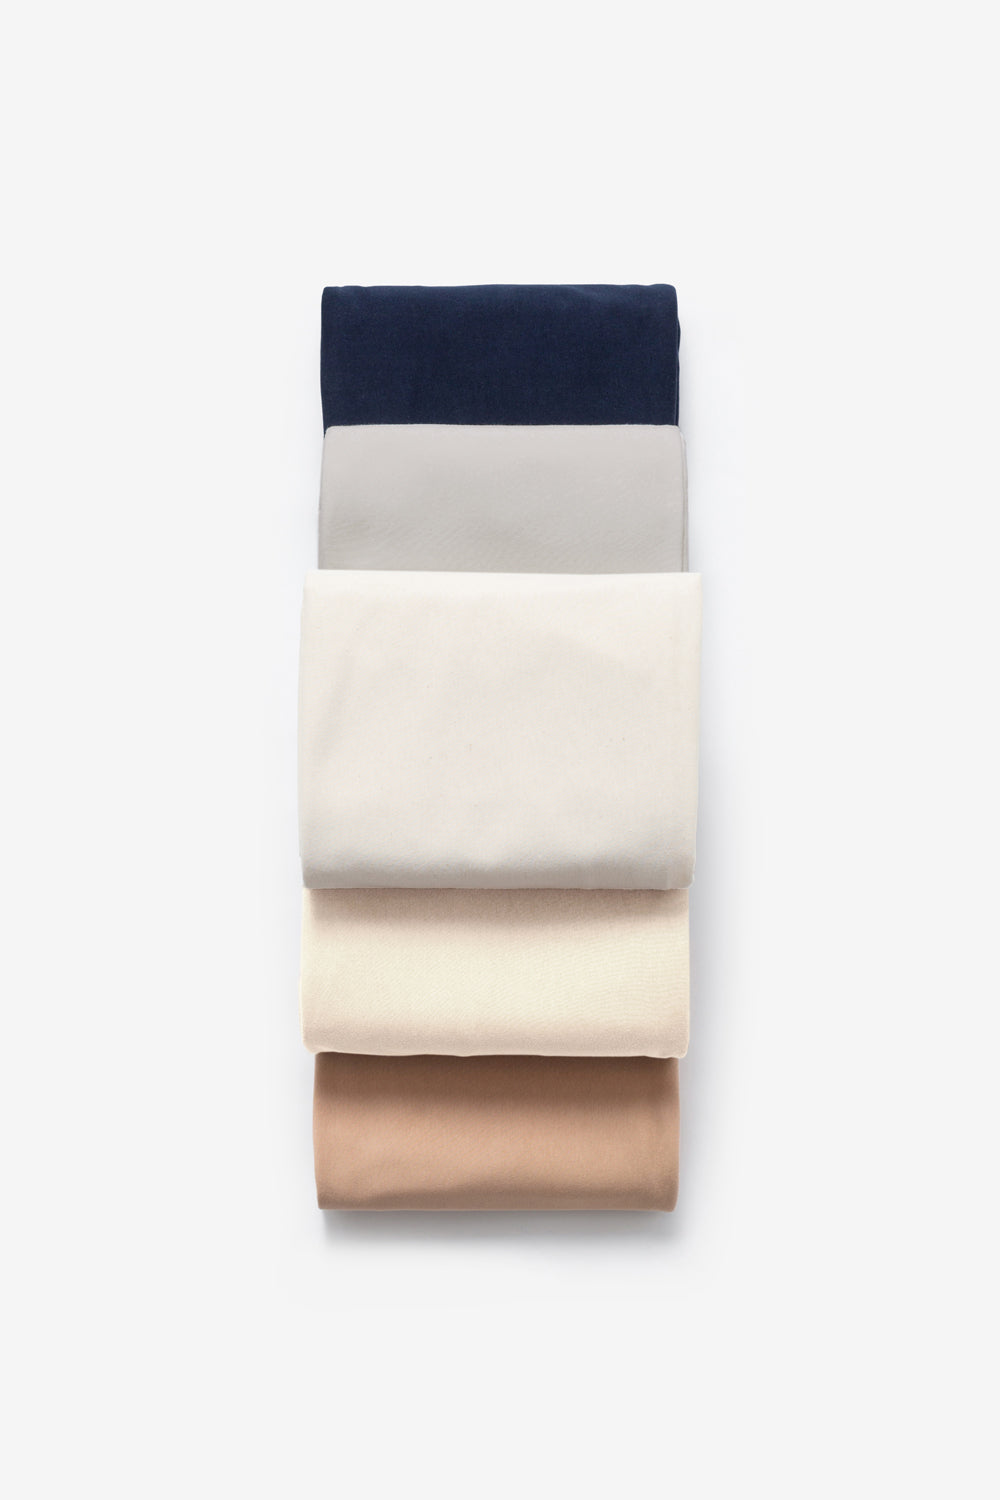 Studio Bundle with Natural, Beige, Sand, Ballet, and Navy fabric.